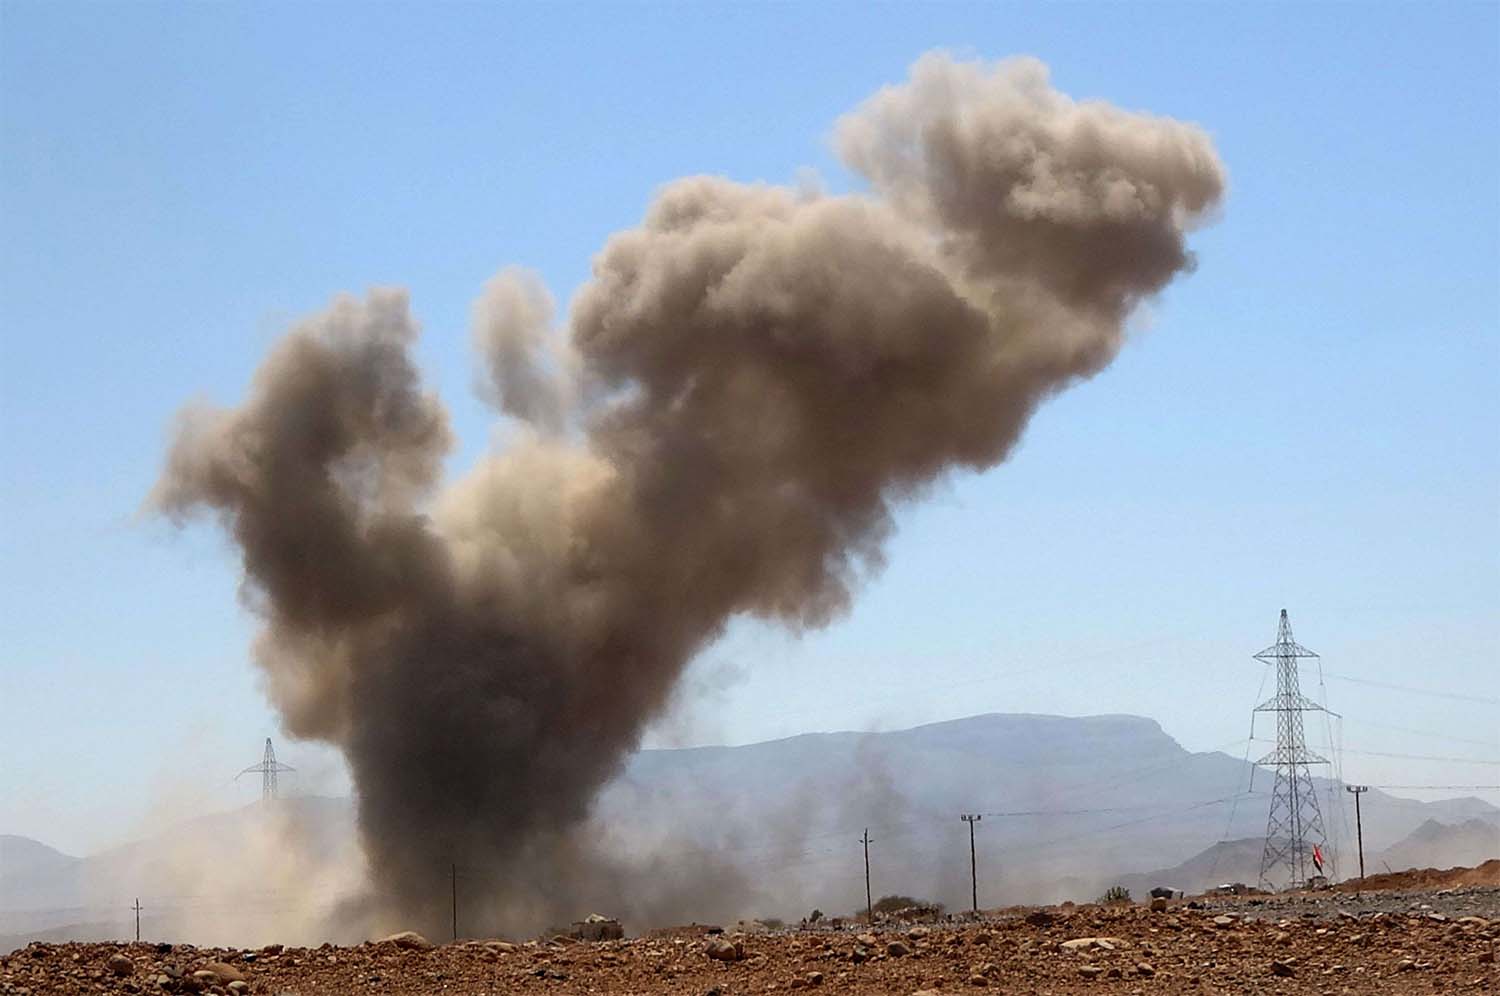 Houthis's assault on Marib is proof that rebels are not committed to ending the war